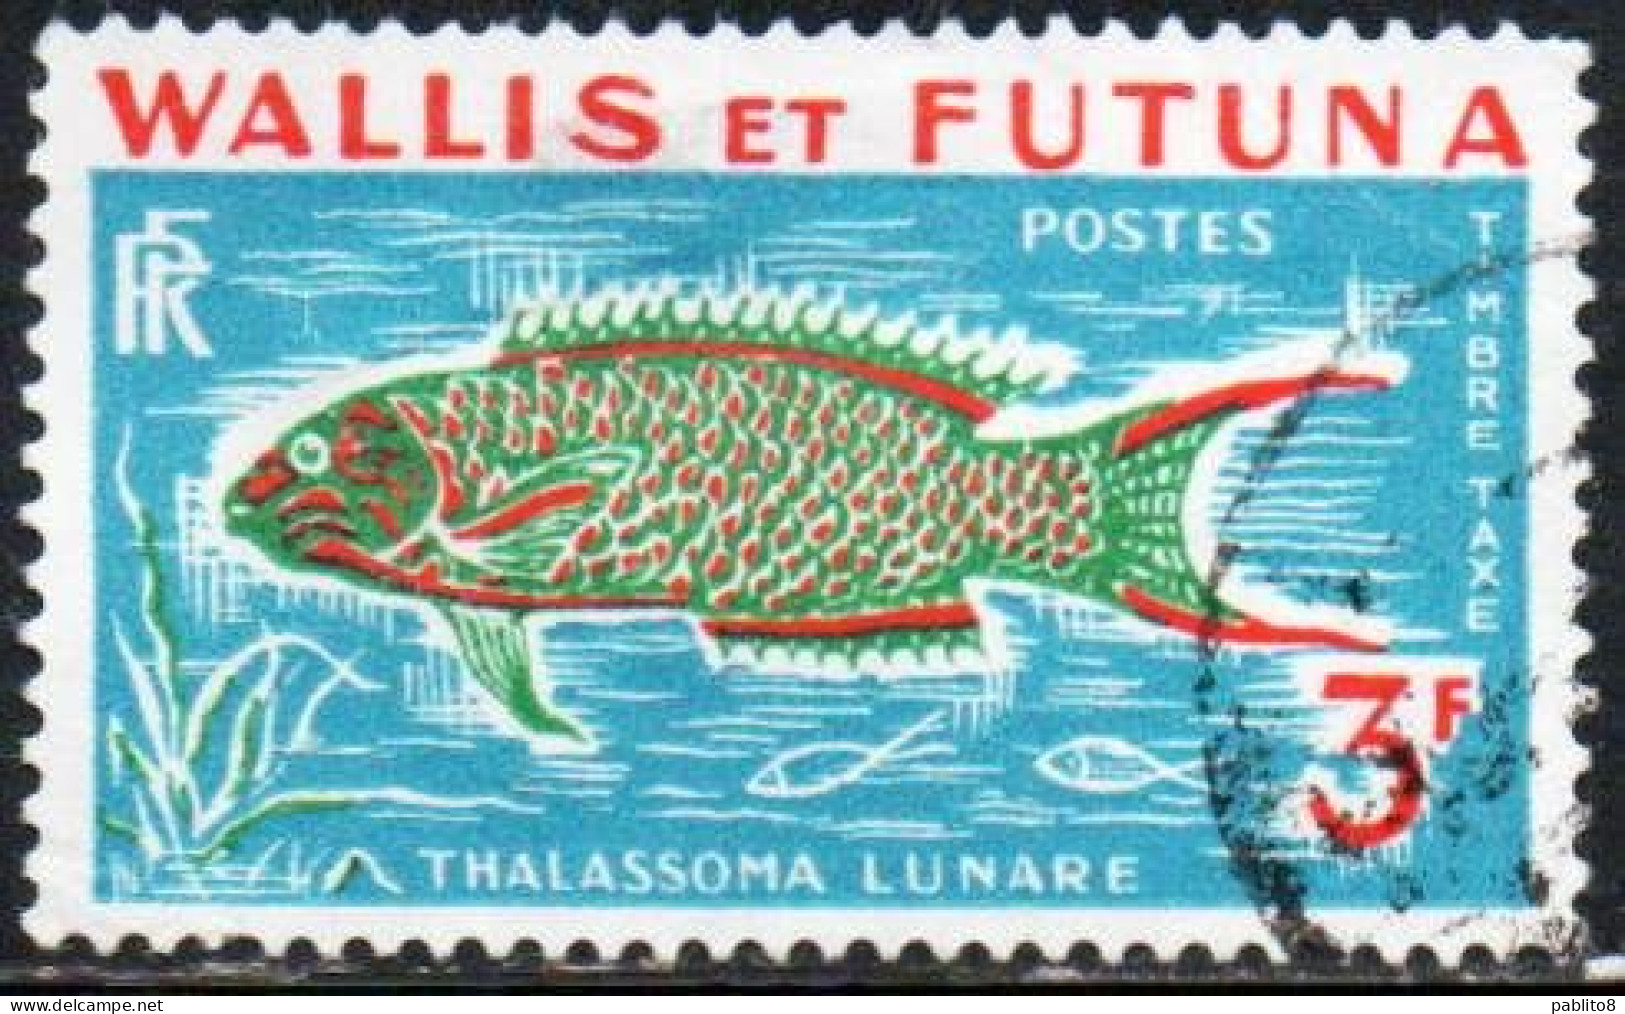 WALLIS AND FUTUNA ISLANDS 1963 POSTAGE DUE STAMPS TAXE SEGNATASSE THALASSOMA LUNARE 3fr USED USATO OBLITERE' - Timbres-taxe